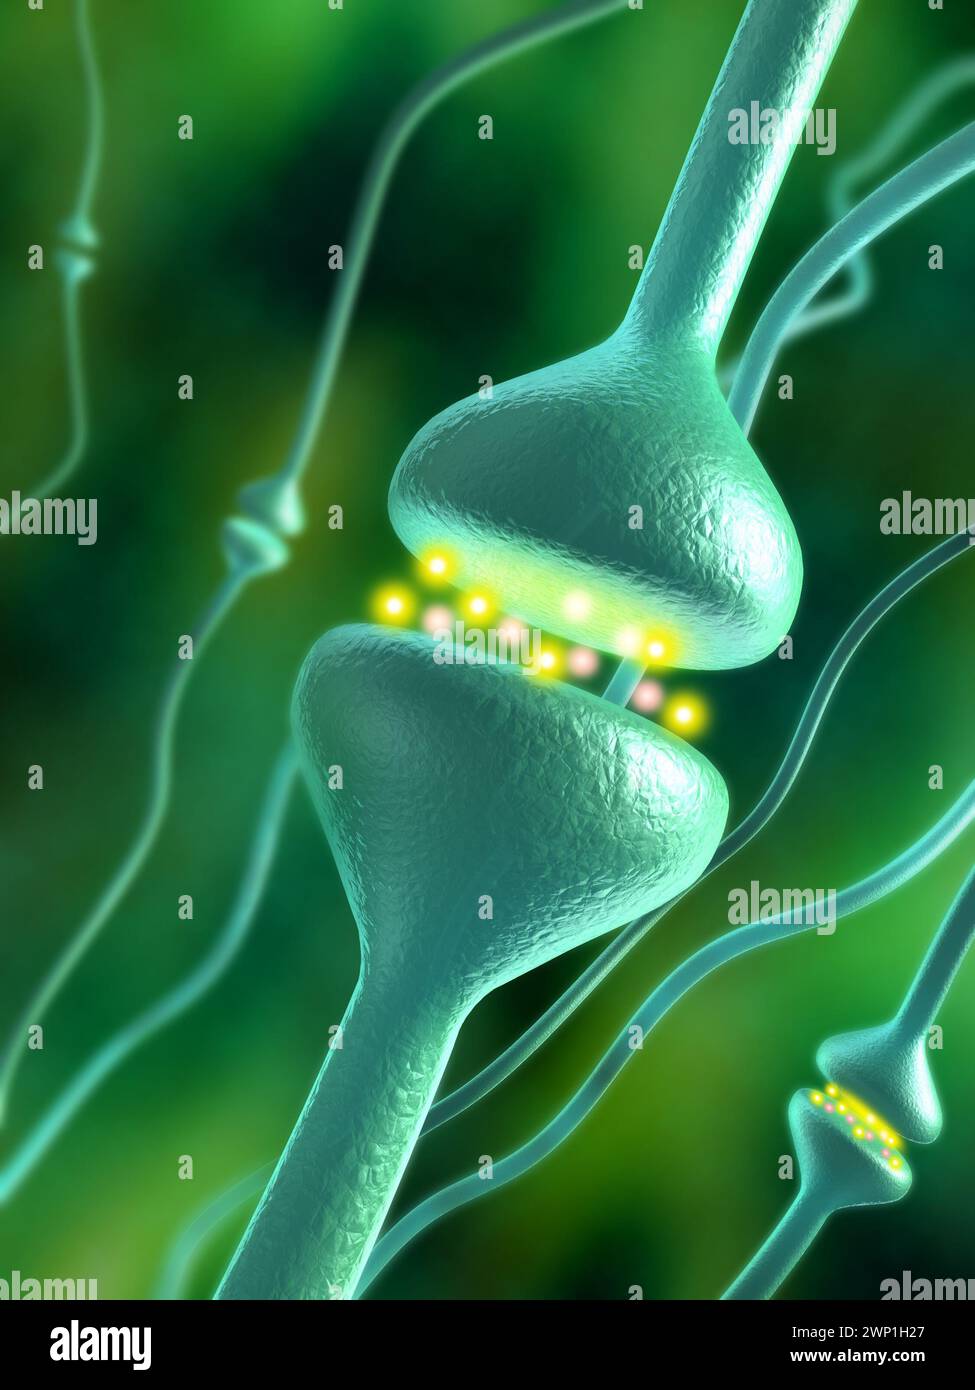 Activated chemical synapses in human brain. Digital illustration. Stock Photo